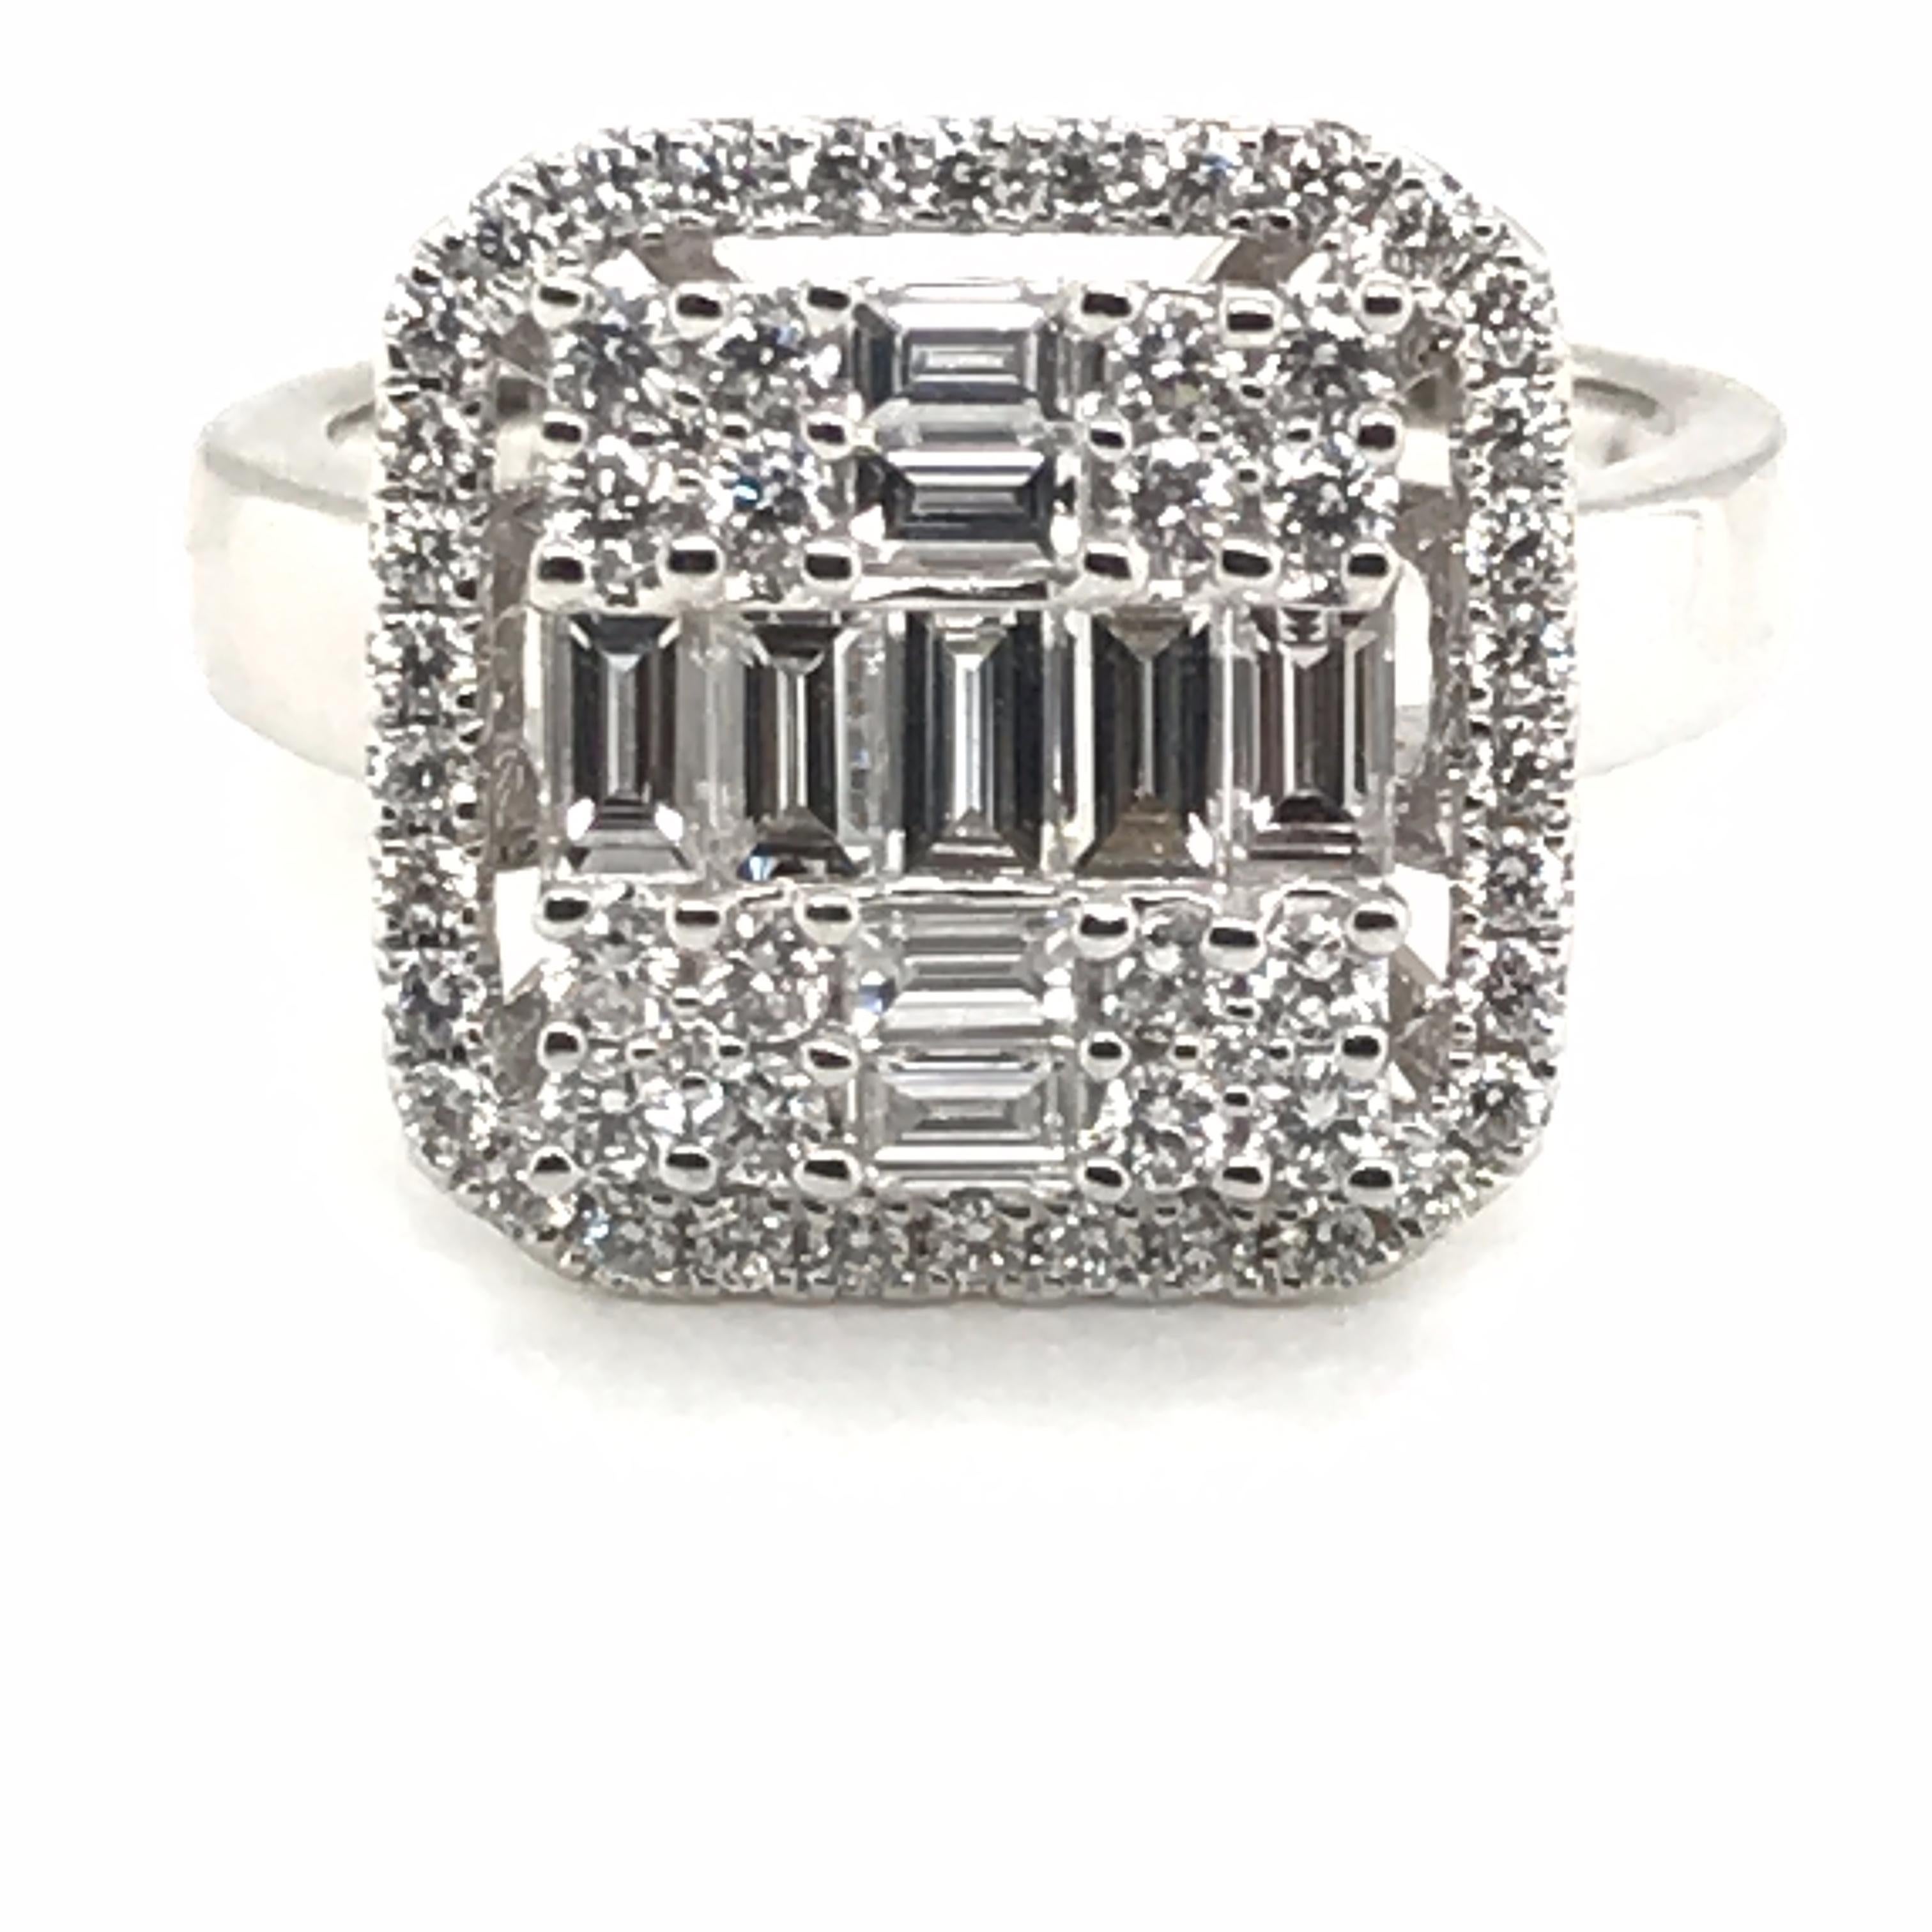 HJN Inc. Ring featuring a 1.07 Carat Baguette Diamond Ring with Round Diamond Halo

Baguette-Cut Diamond Weight: 0.58 Carats
Round-Cut Diamond Weight: 0.49 Carats

Total Stones: 63
Clarity Grade: SI1
Color Grade: H
Total Diamond Weight: 1.07